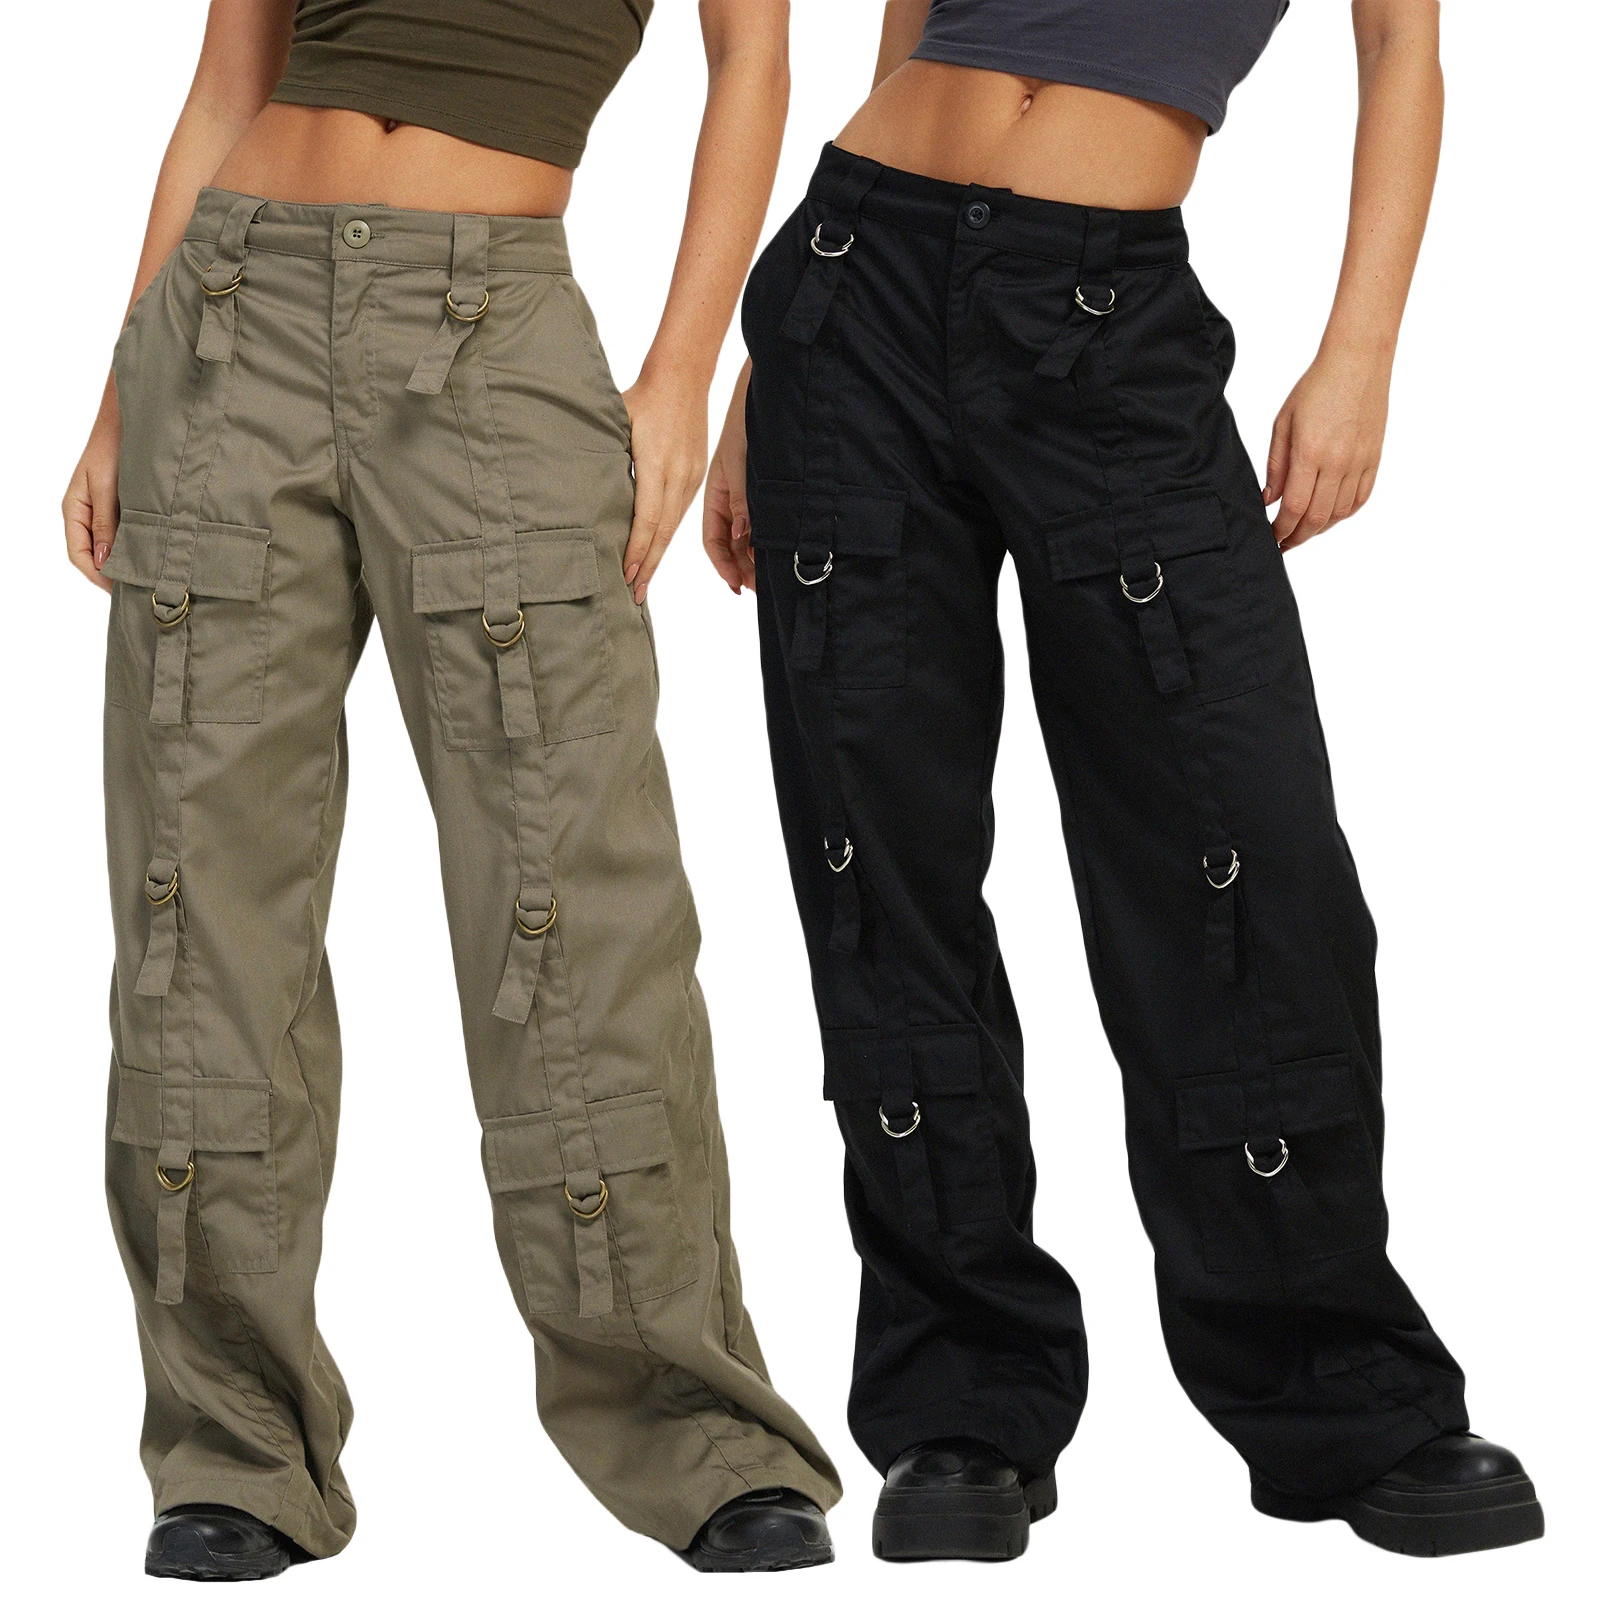 Women's Casual Cargo Pants Solid Color Low Waist Zipper Closure Loose Straight-Leg Trousers with Multi Pockets Sweatpants